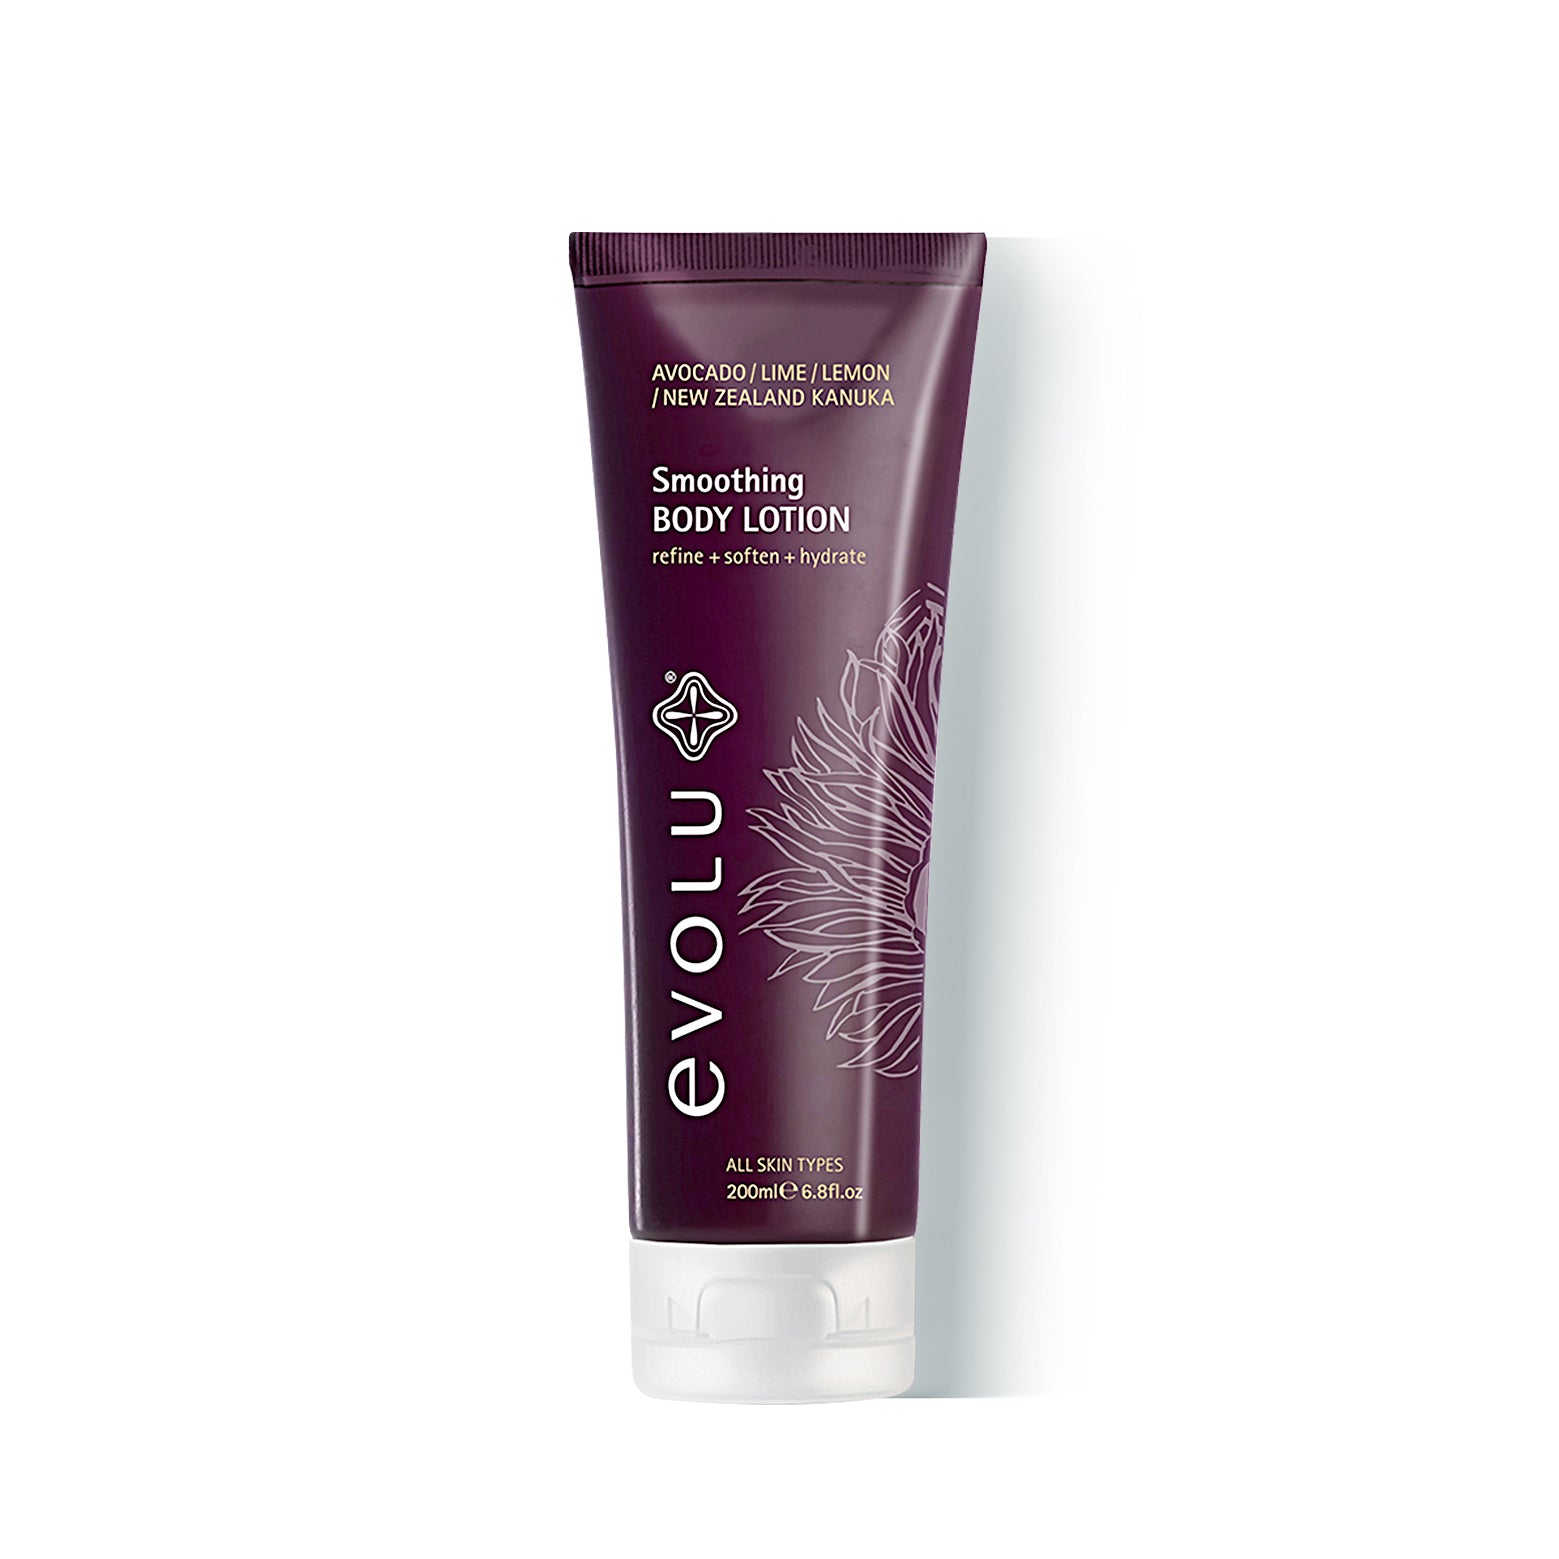 Smoothing BODY LOTION 200ml